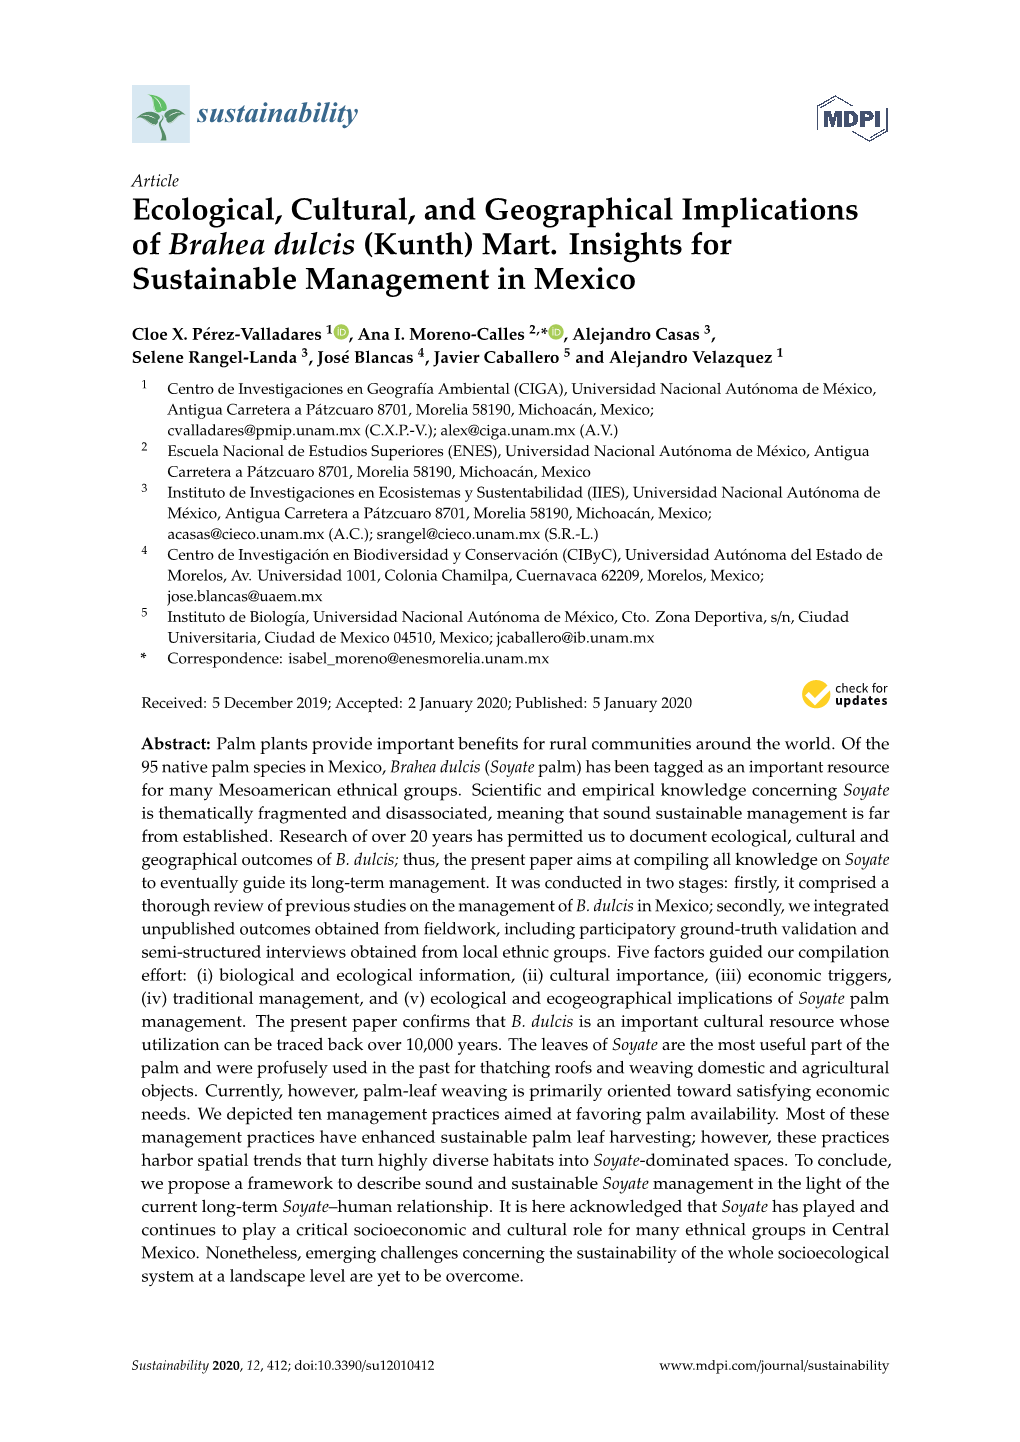 Ecological, Cultural, and Geographical Implications of Brahea Dulcis (Kunth) Mart